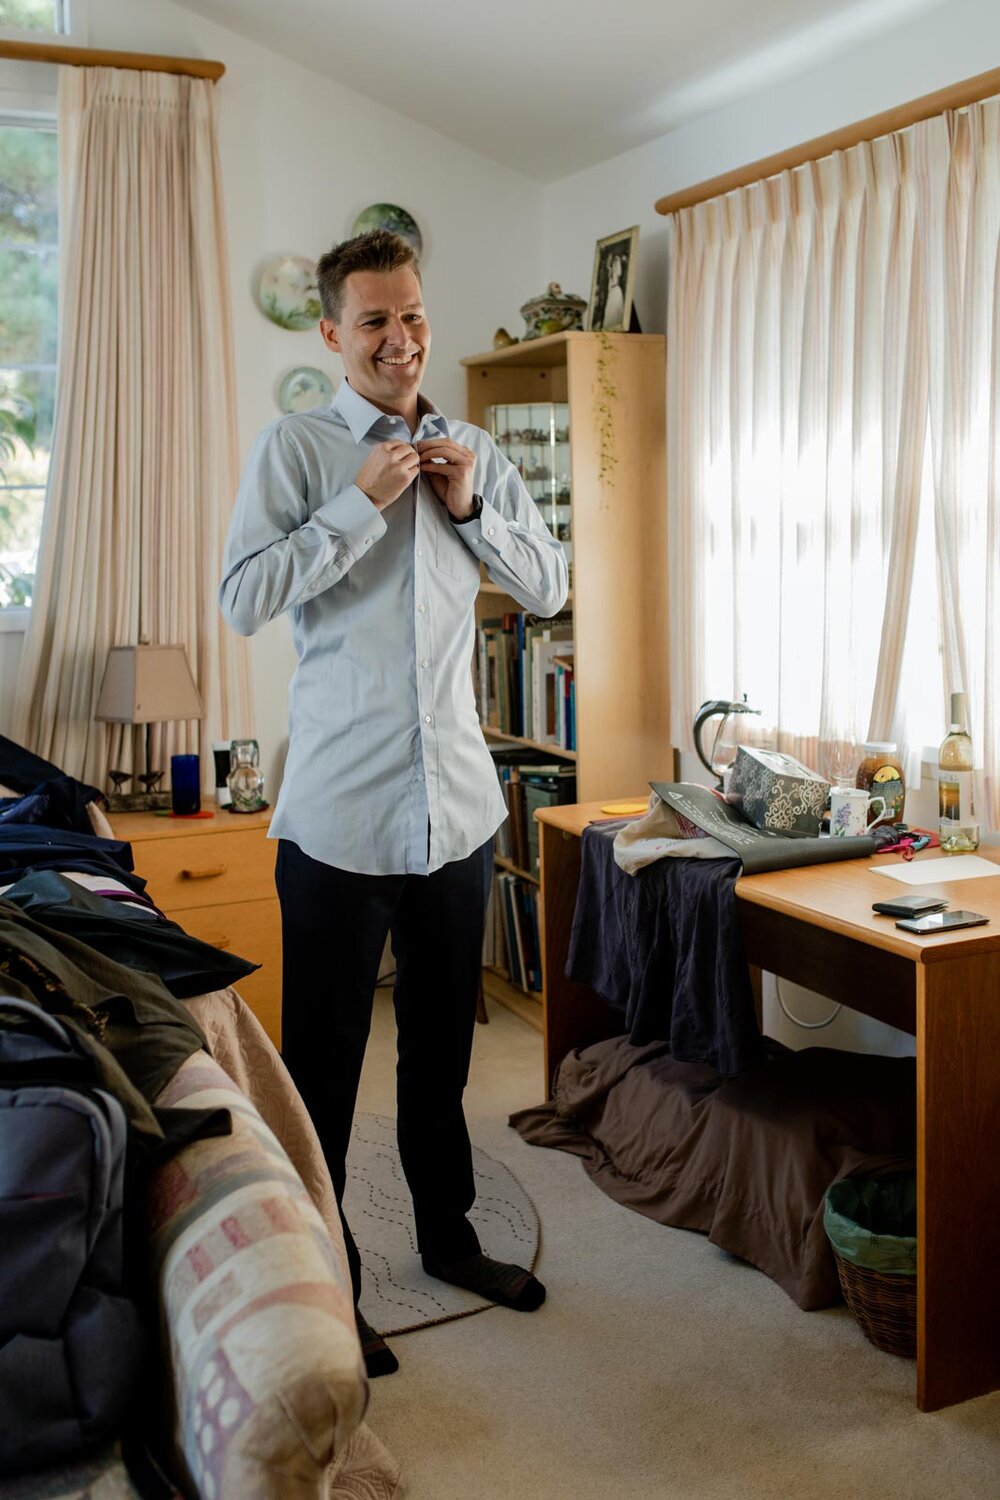 Groom buttoning up dress shirt in bedroom in Mendocino CA Carly Romeo feminist photography